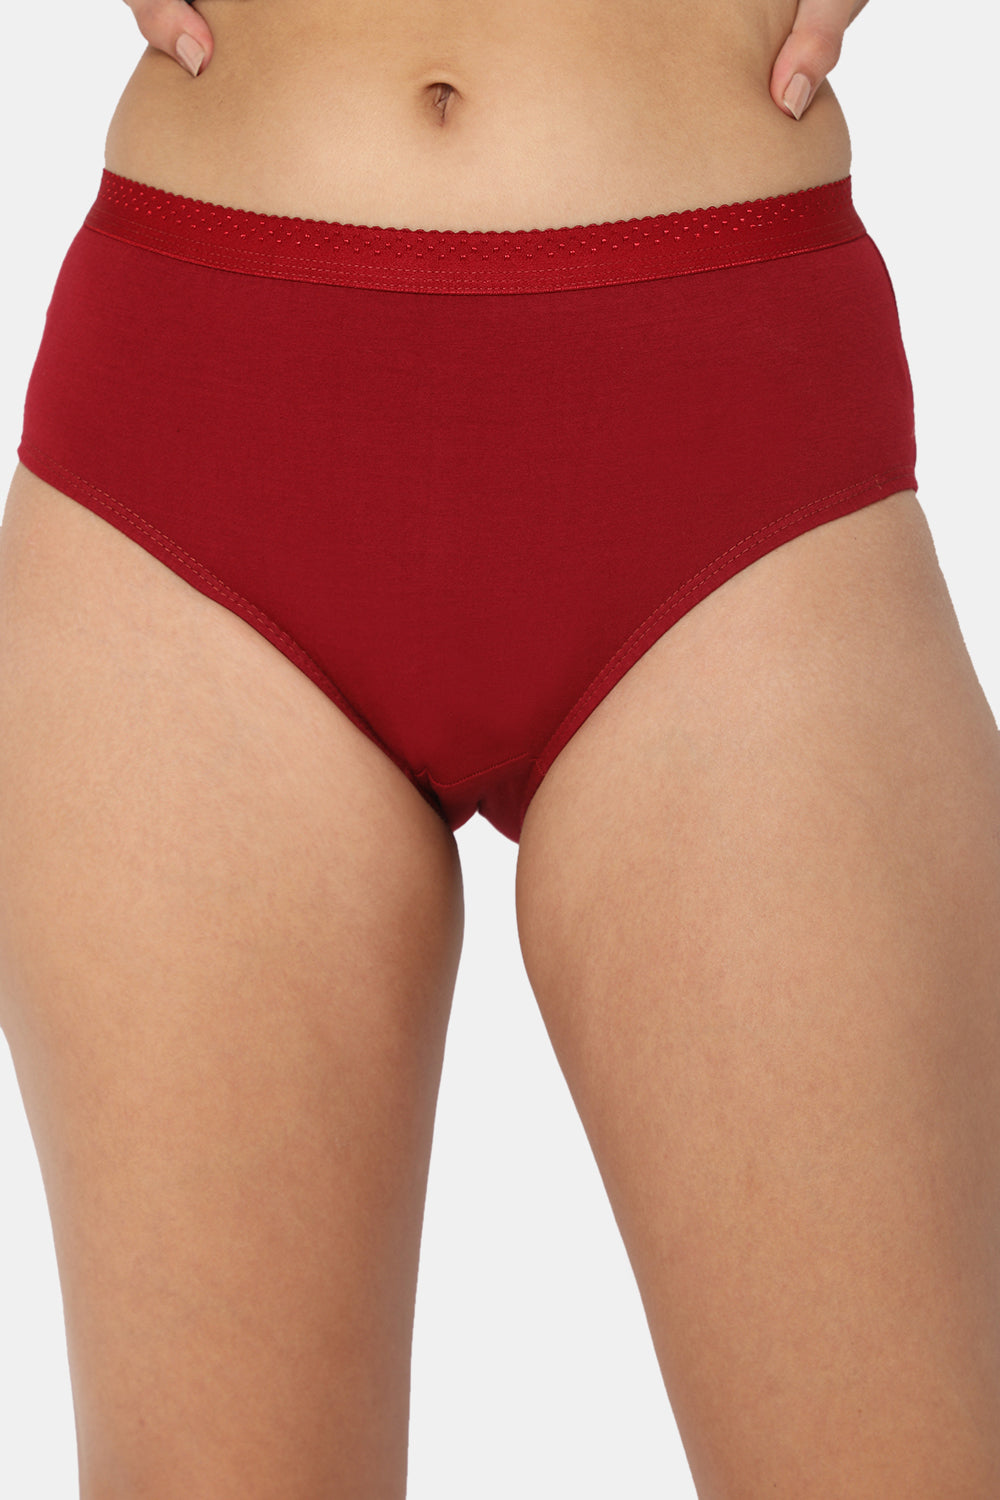 Plain Cotton Panty Ladies Panties, Size: 80-100 Available at Rs 19